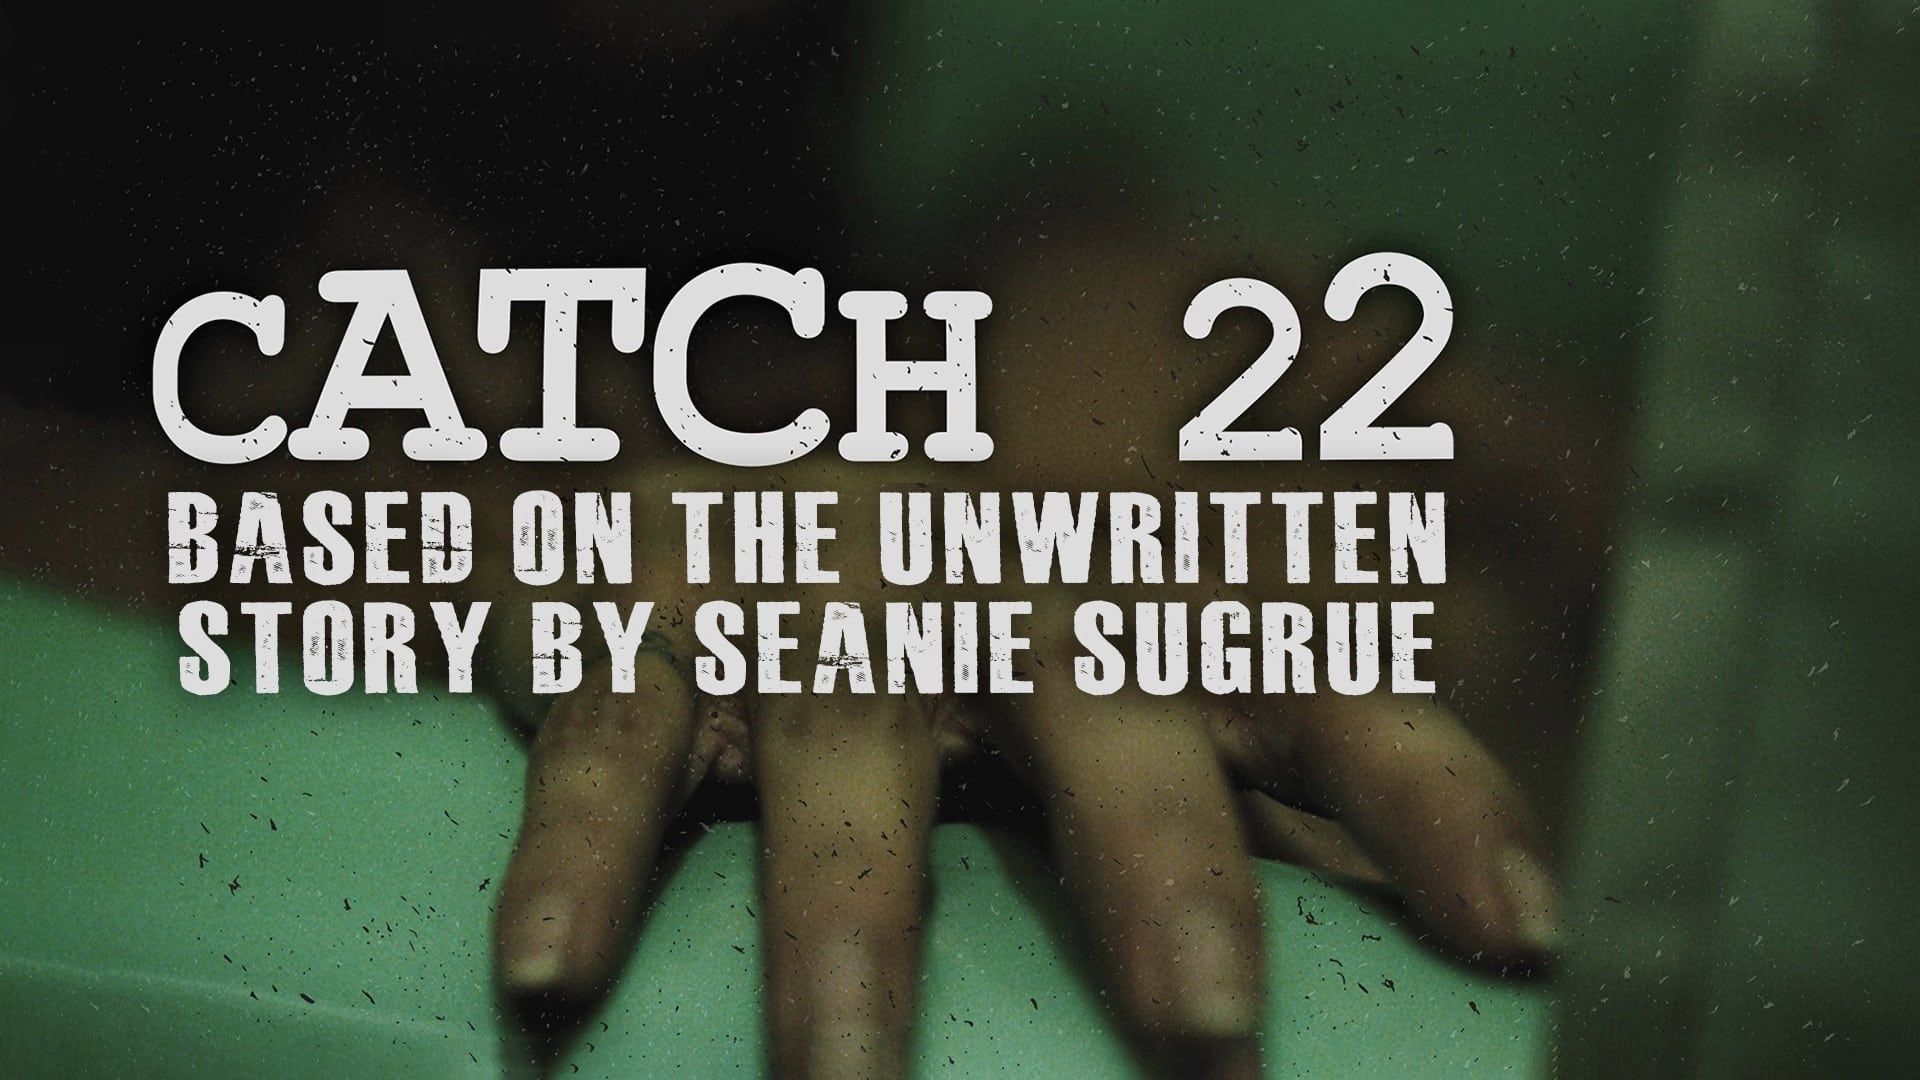 Catch 22: Based on the Unwritten Story by Seanie Sugrue background